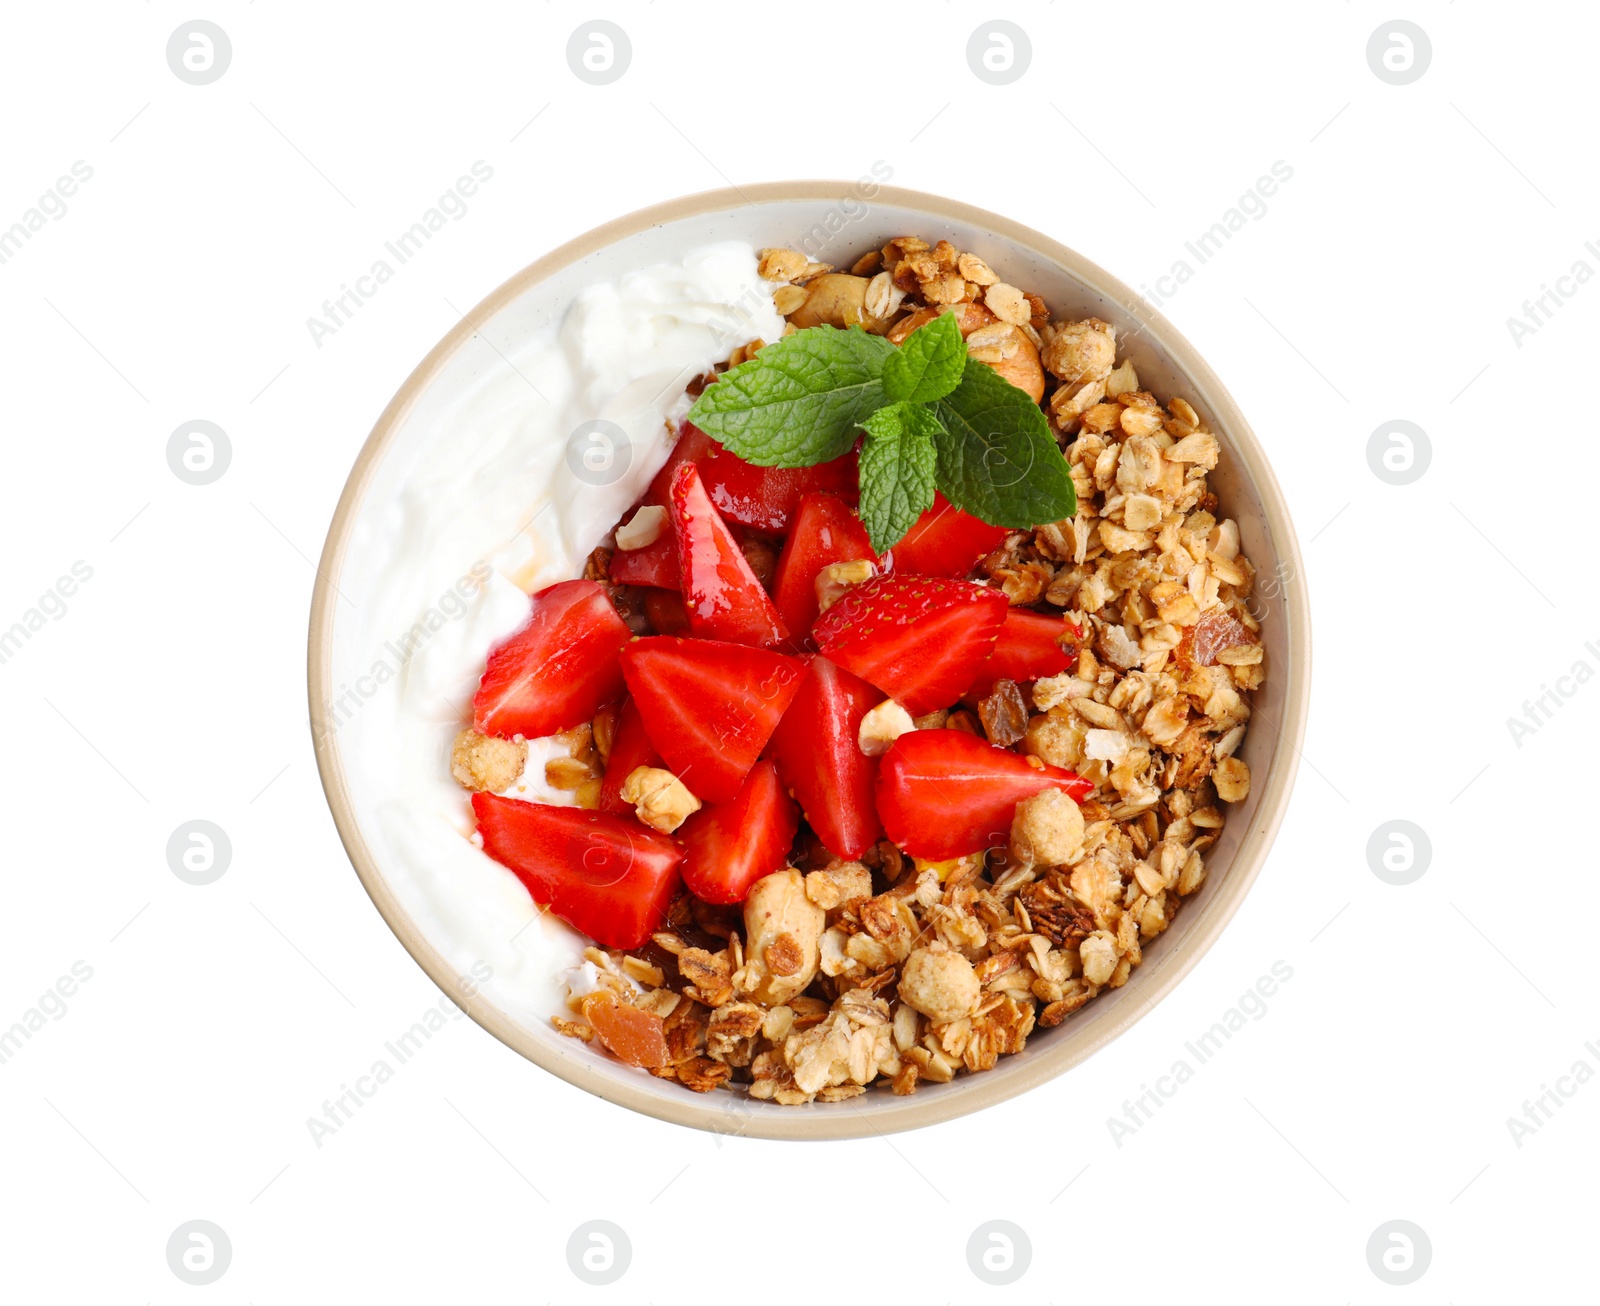 Photo of Bowl with tasty granola and strawberries on white background, top view. Healthy meal